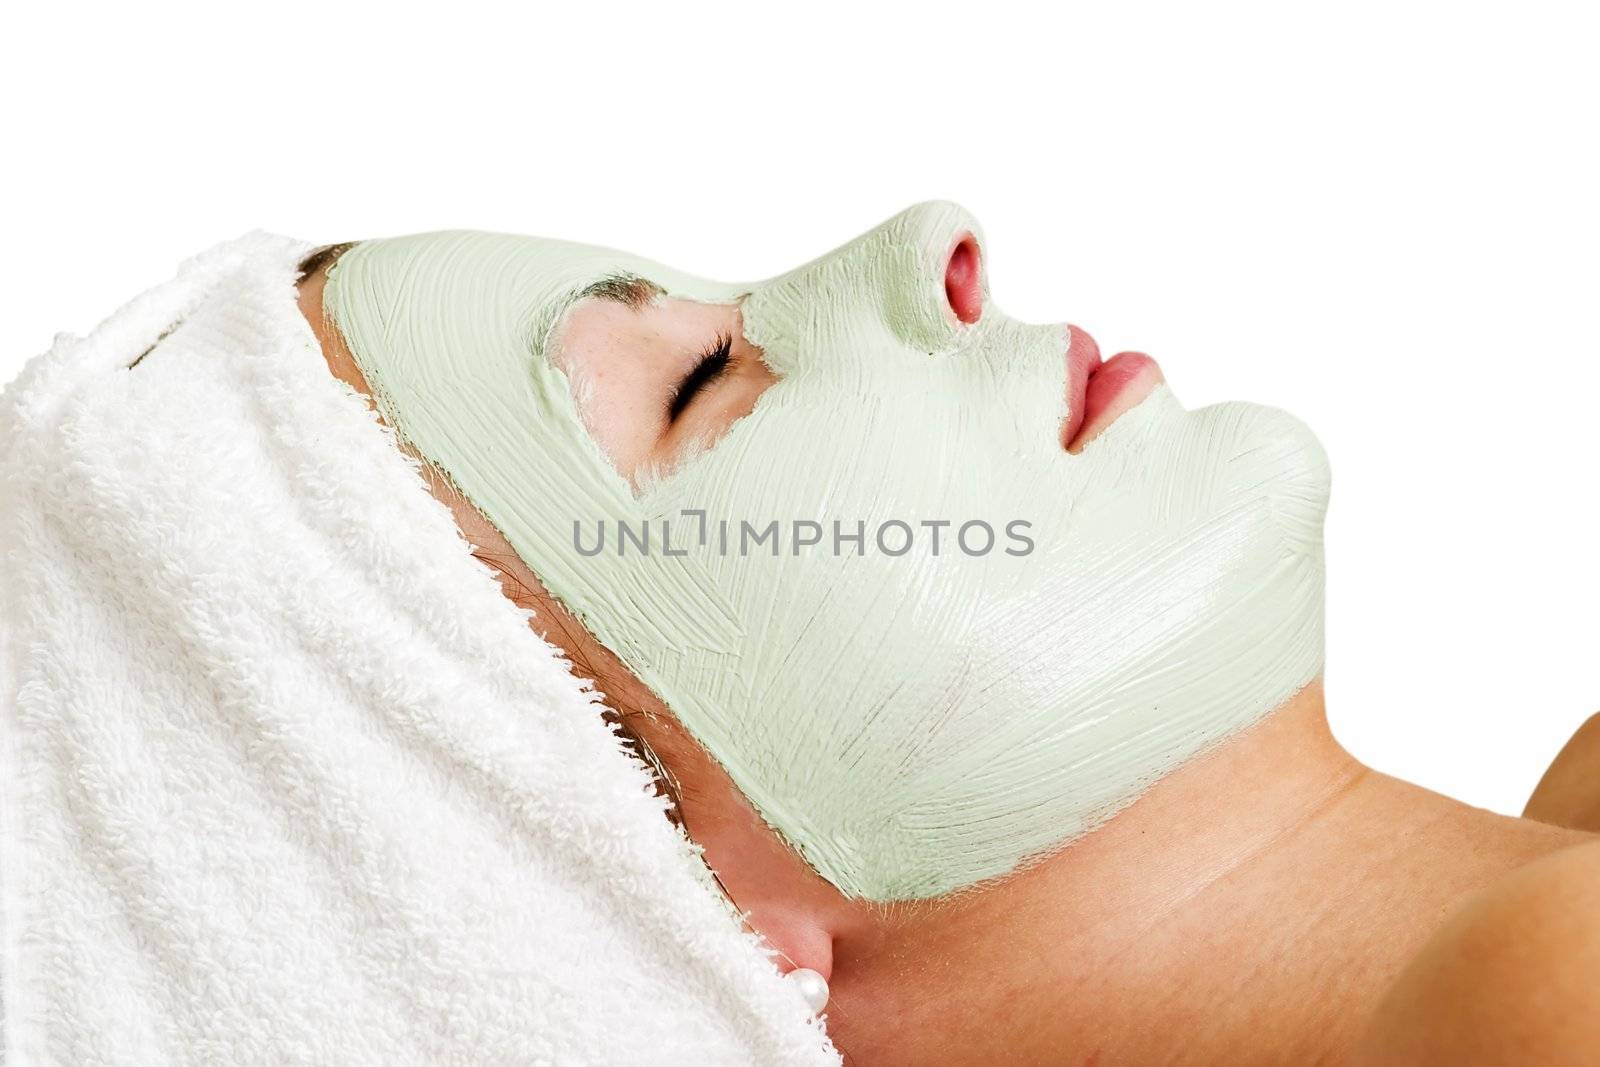 Facial Mask Relaxation by leaf